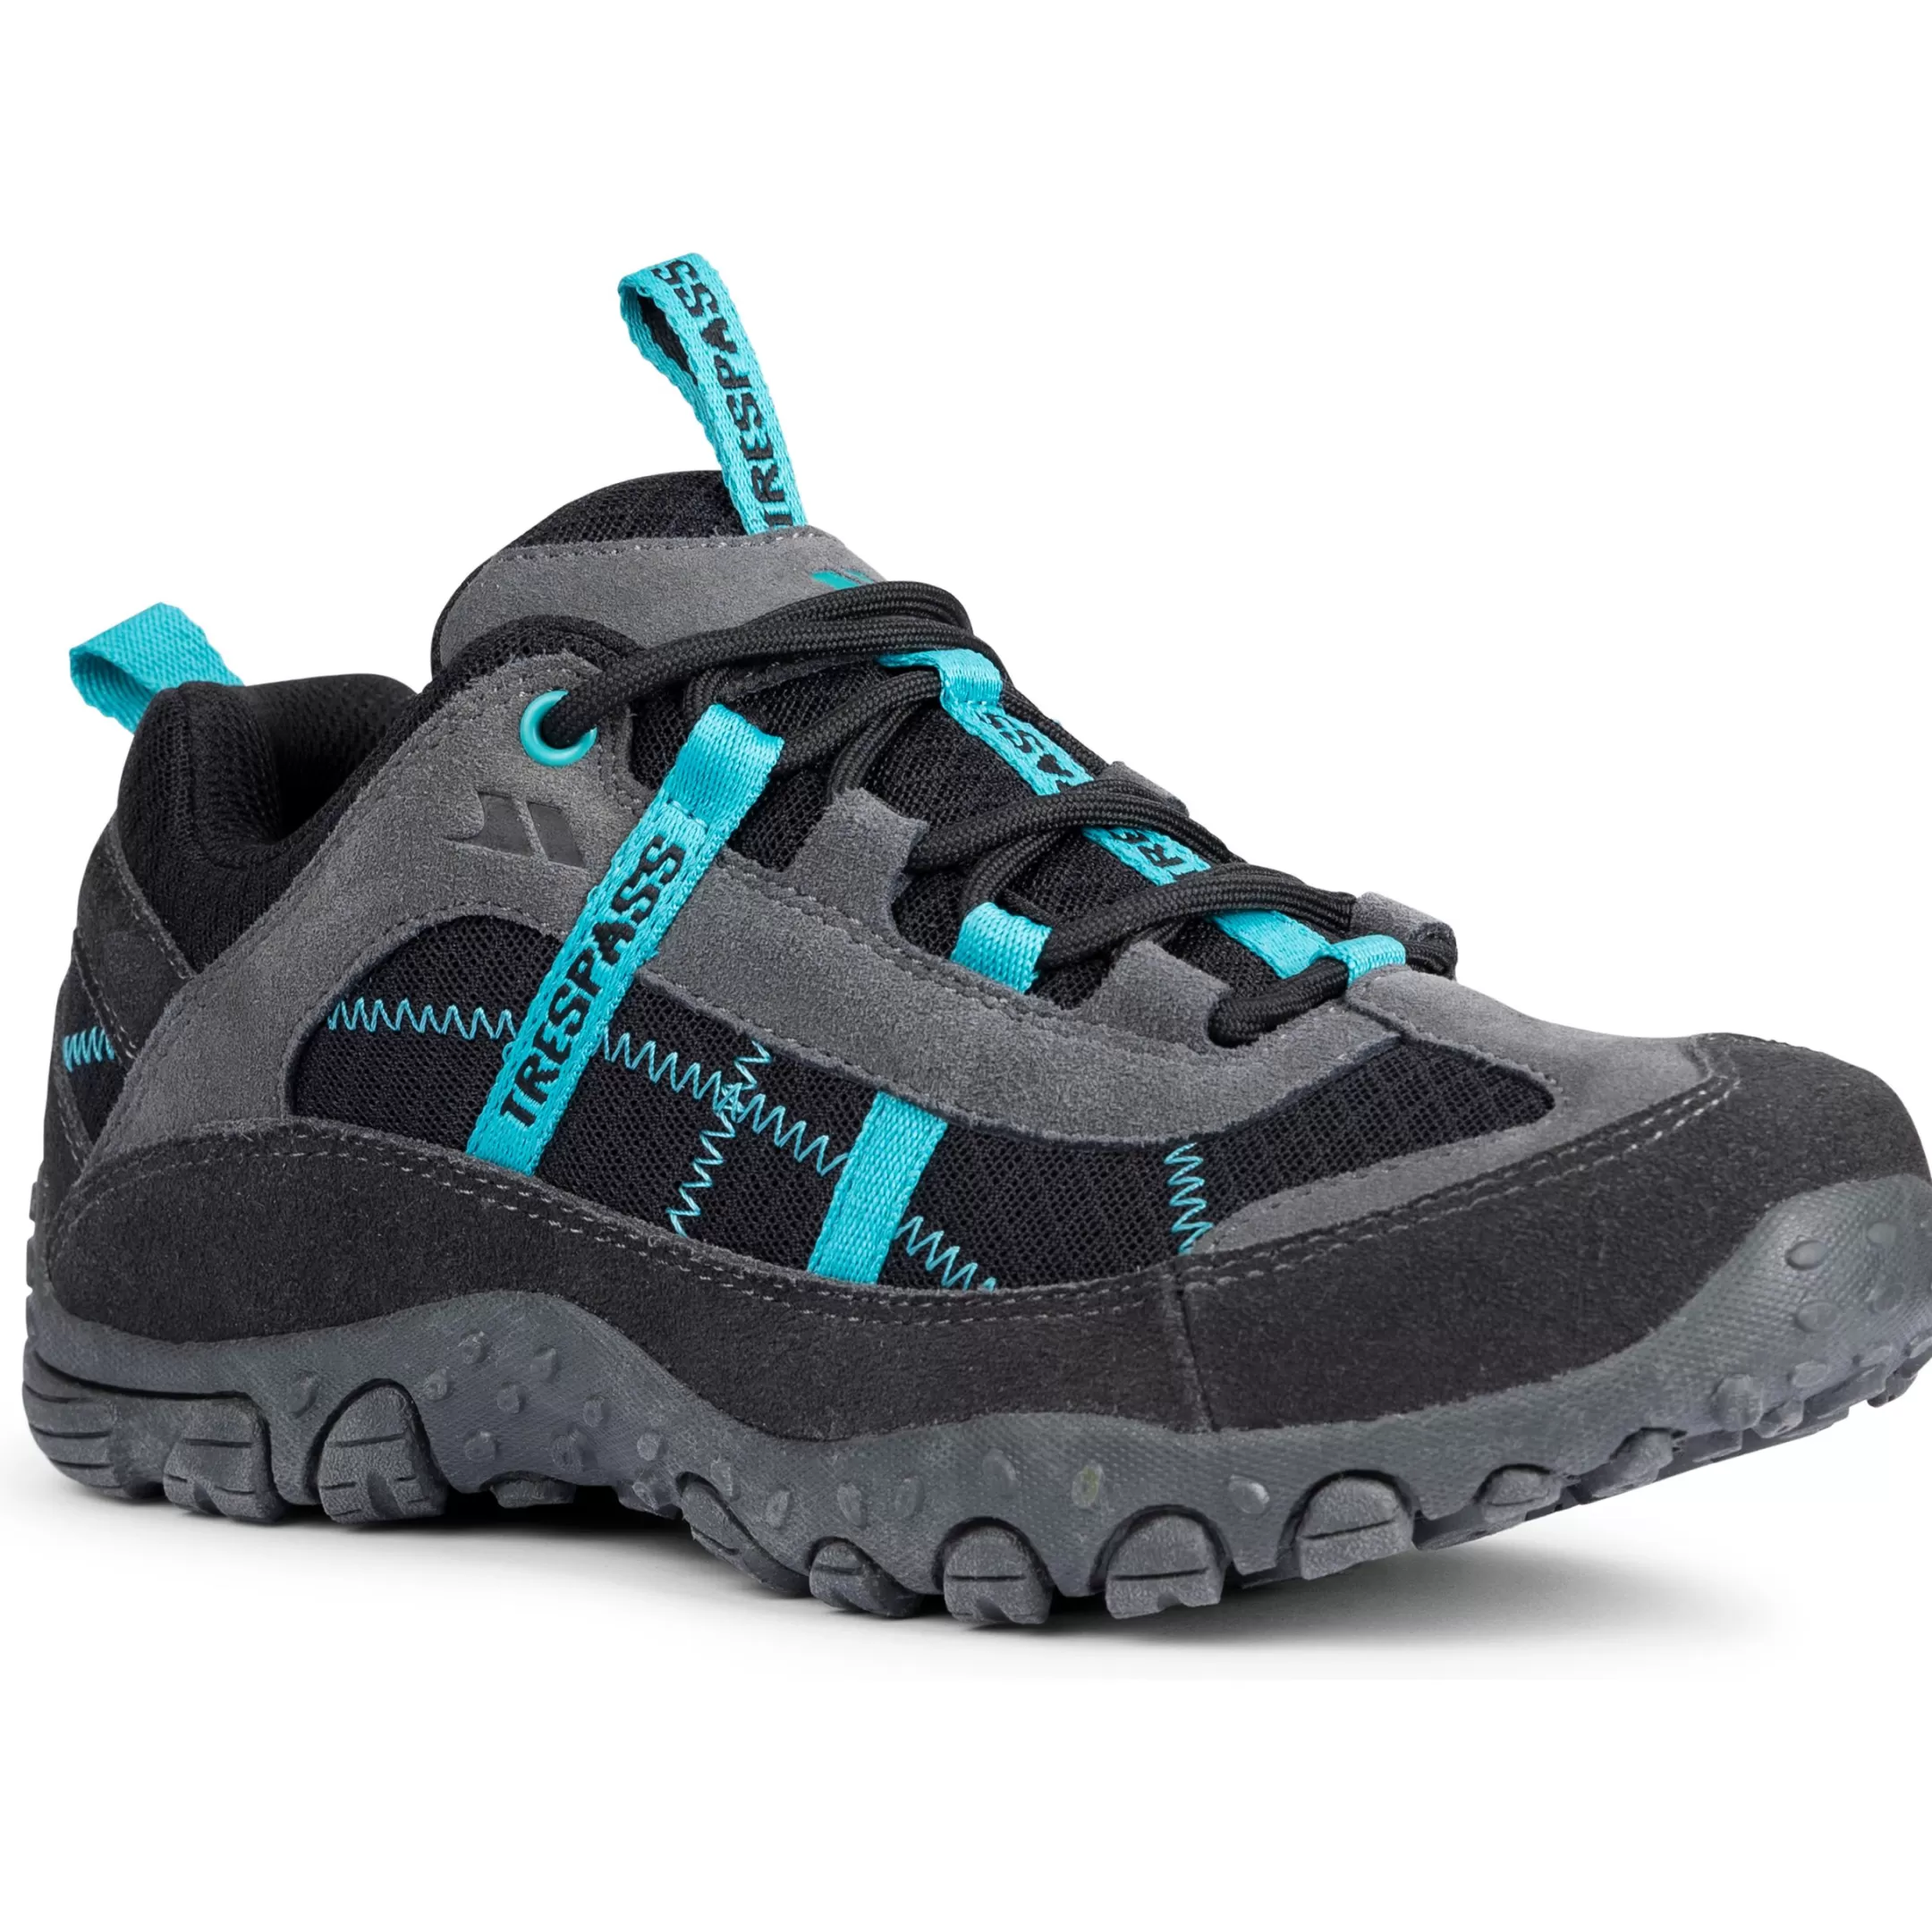 Womens Breathable Walking Shoes Fell | Trespass Outlet